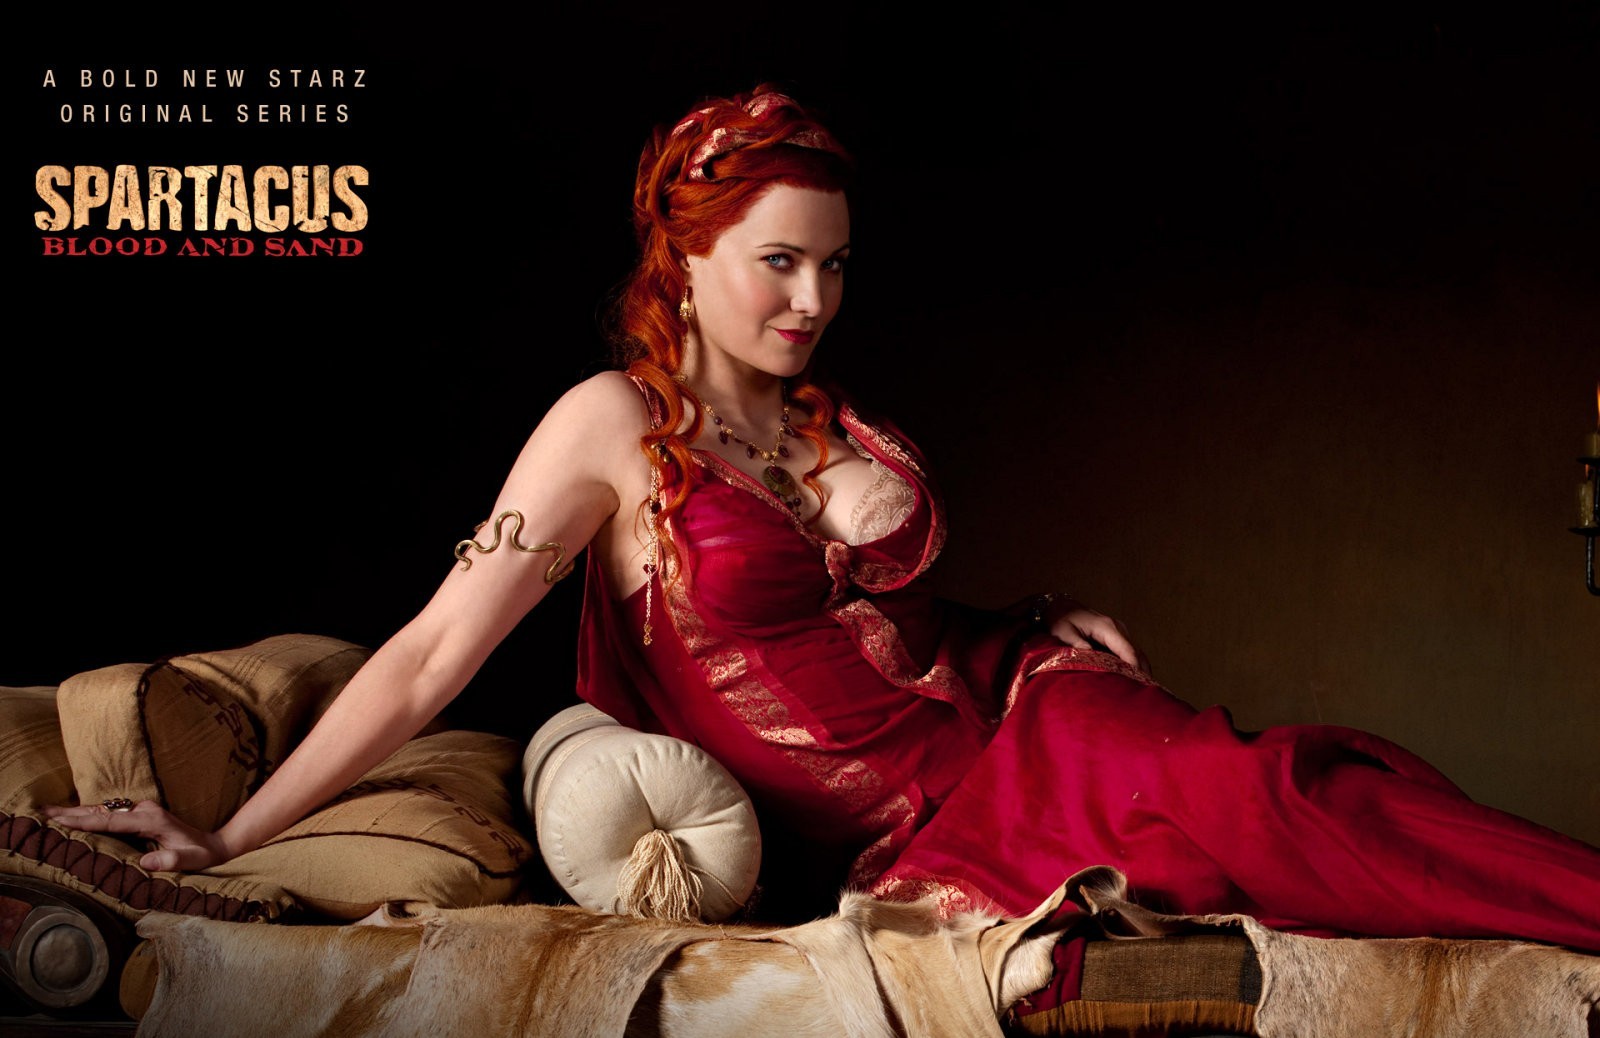 aysen osman recommends lucy lawless spartacus scene pic